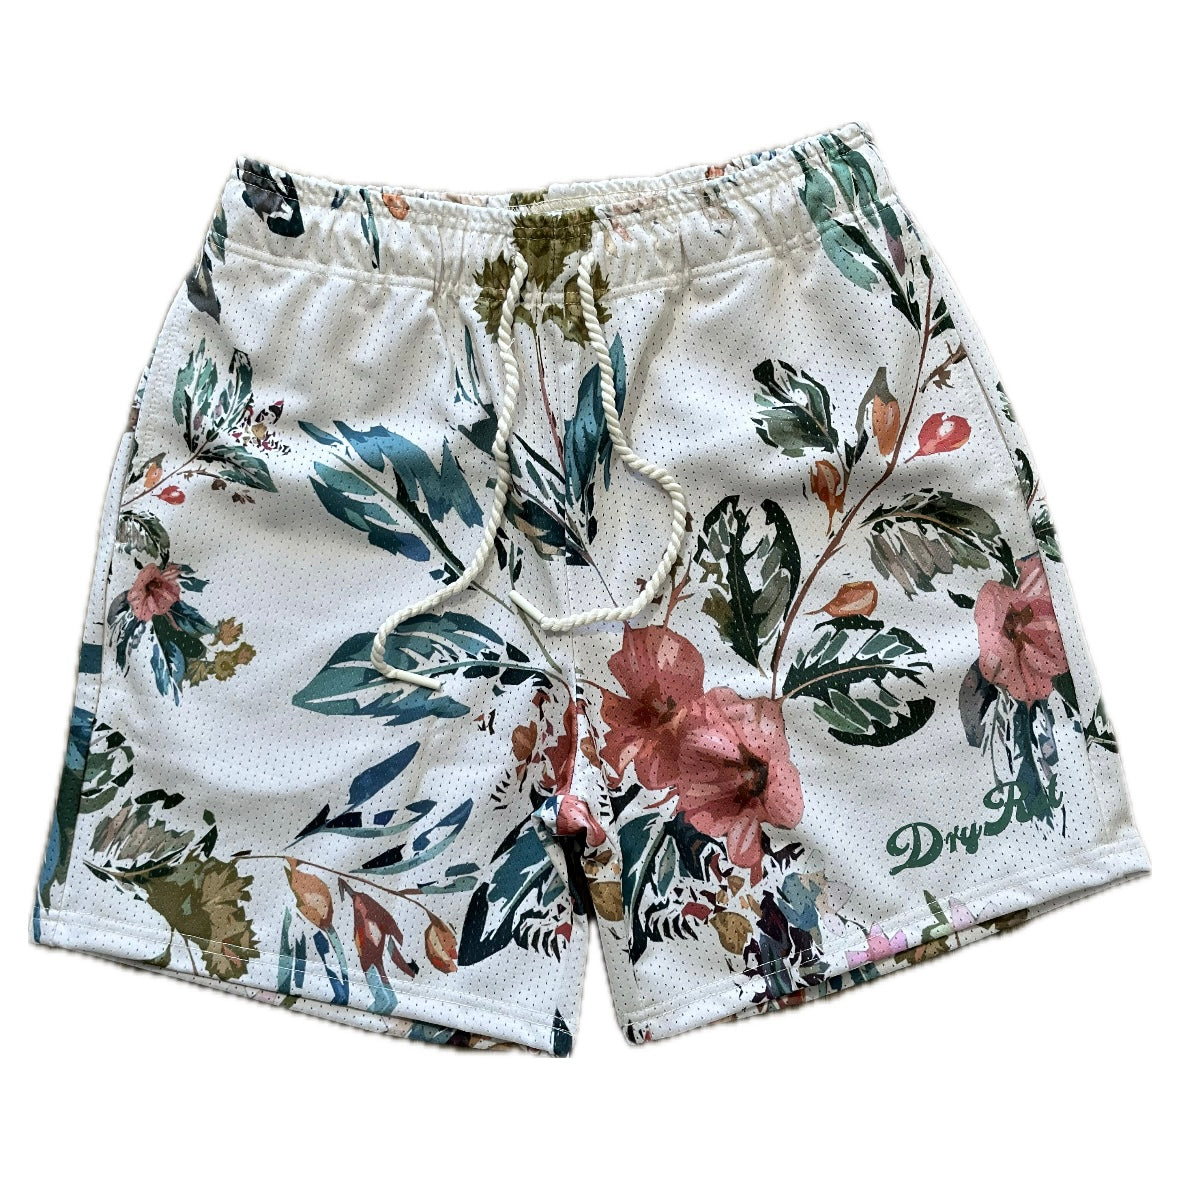 Dry Rot Floral Shorts